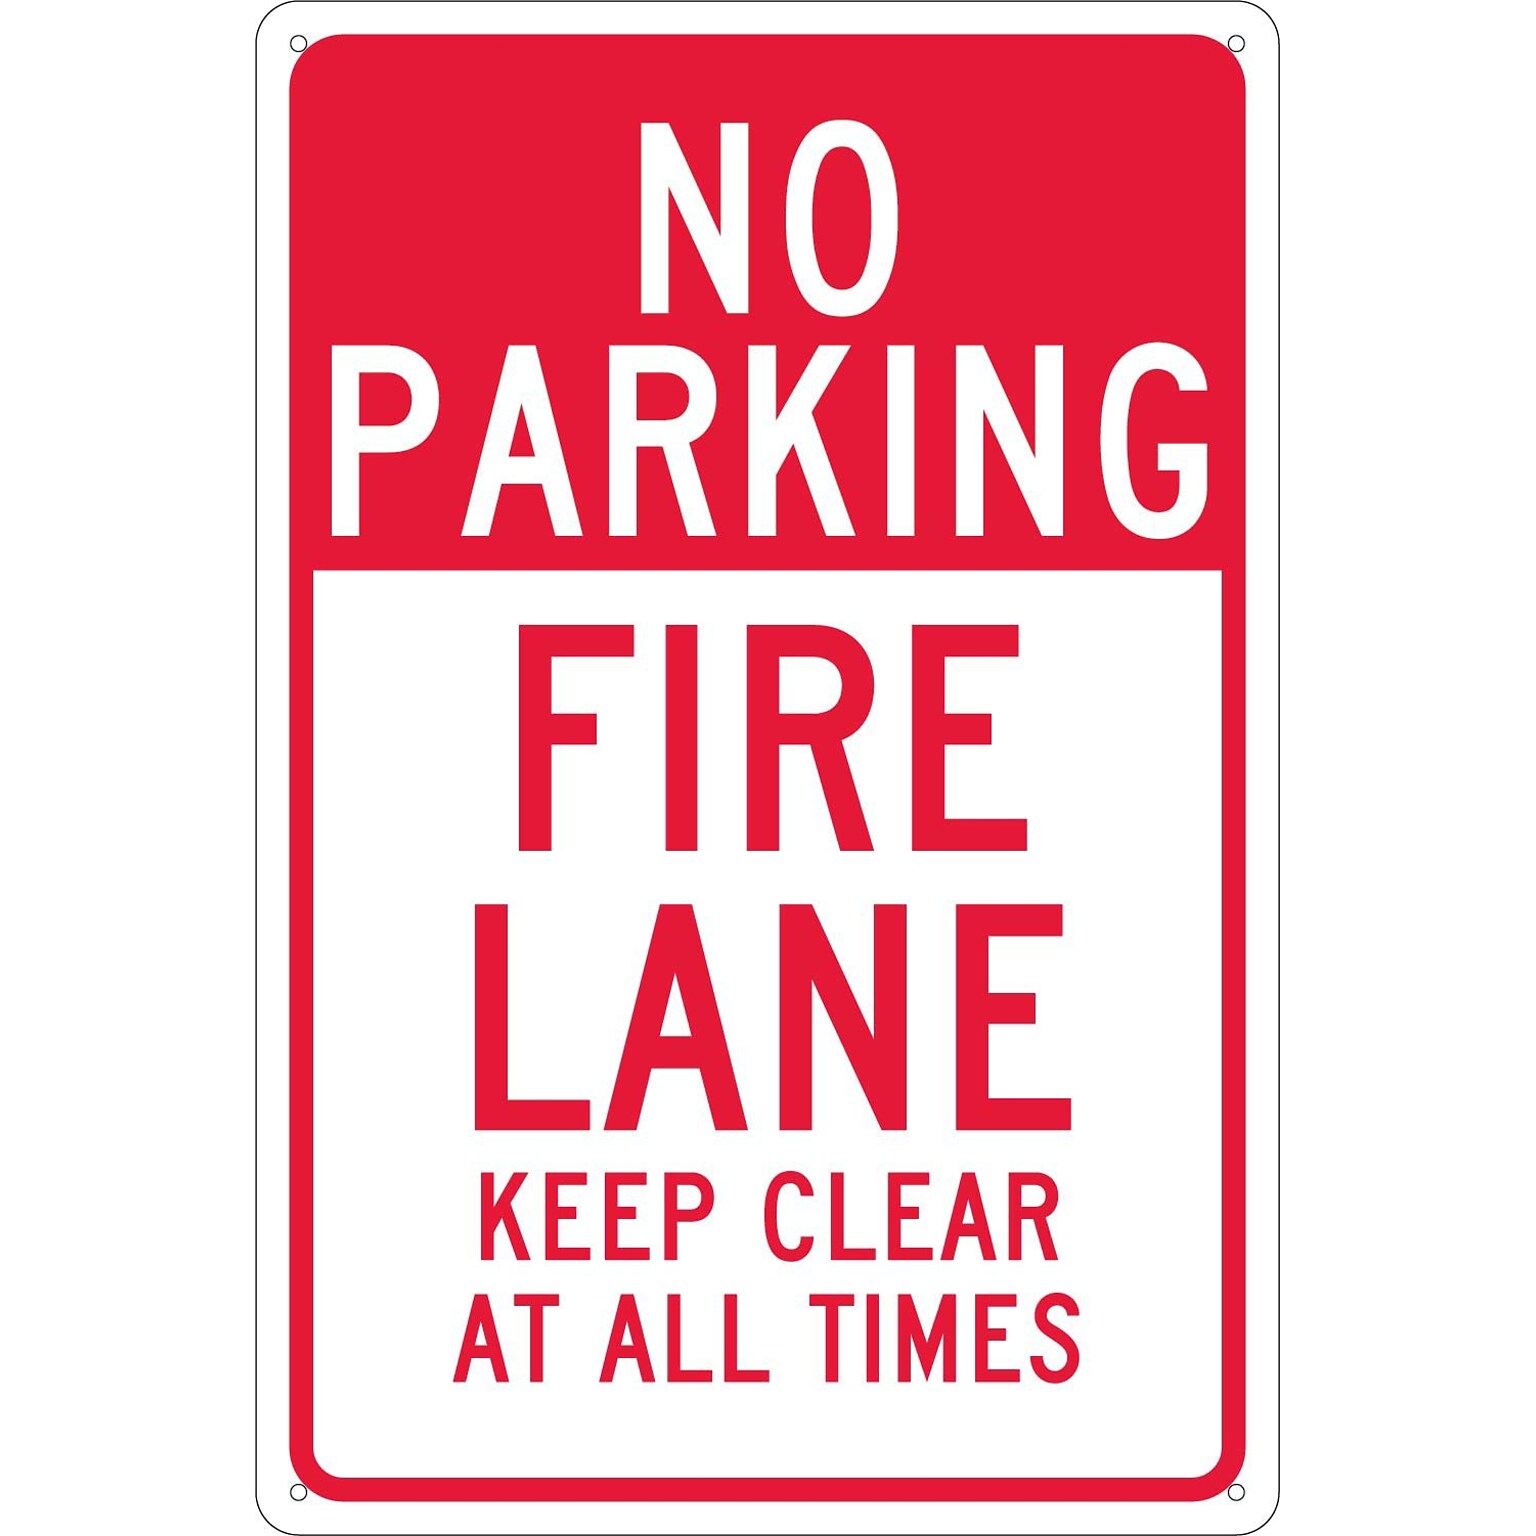 National Marker Reflective No Parking Fire Lane Keep Clear At All Times Parking Sign, 18 x 12, Aluminum (TM47G)